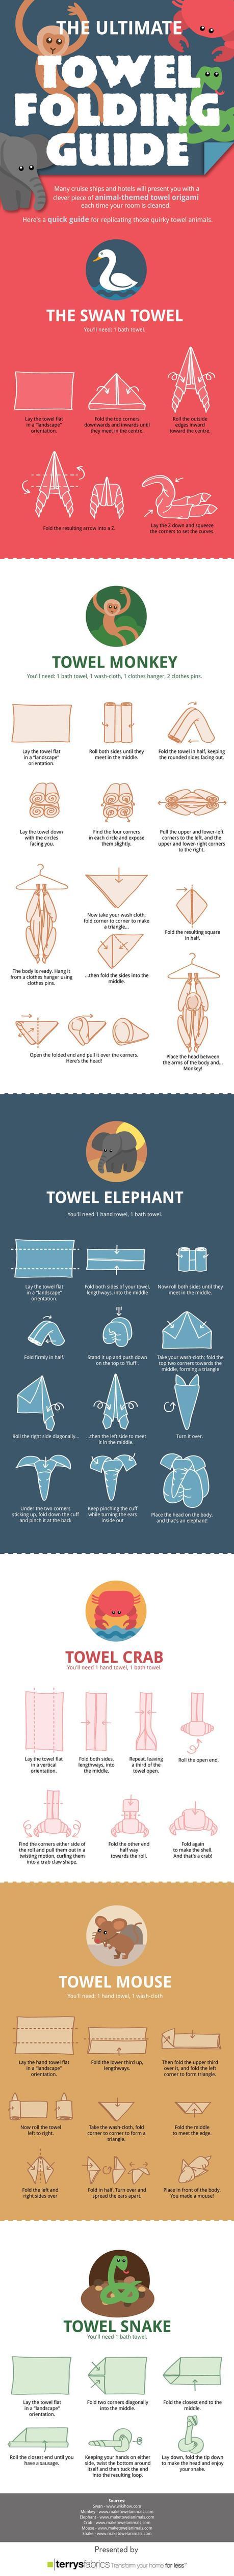 Use Origami to Fold Towels into Wild Animals!